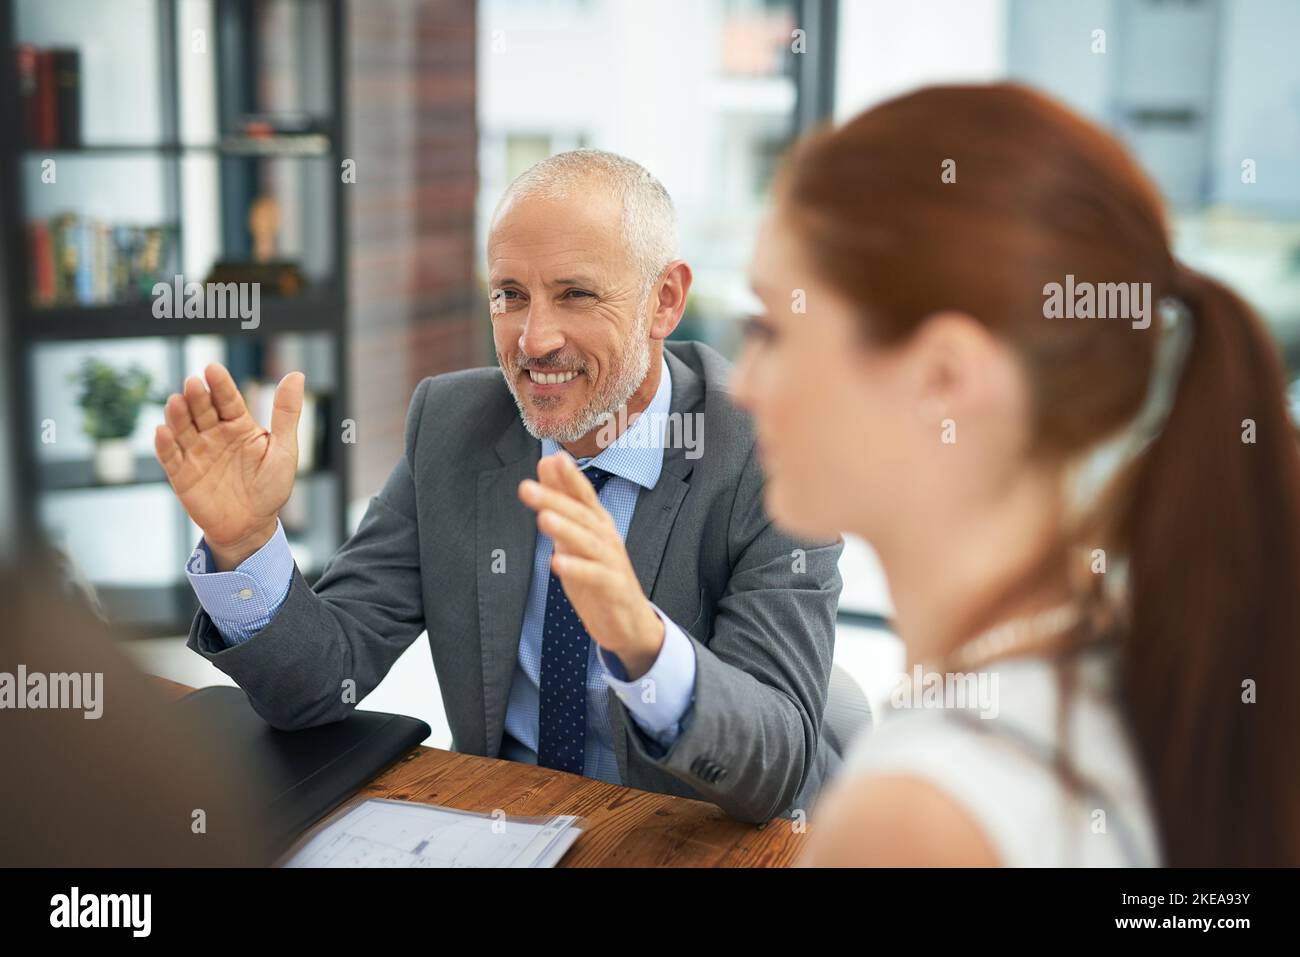 Think bigger picture. a group of businesspeople meeting in the boardroom. Stock Photo